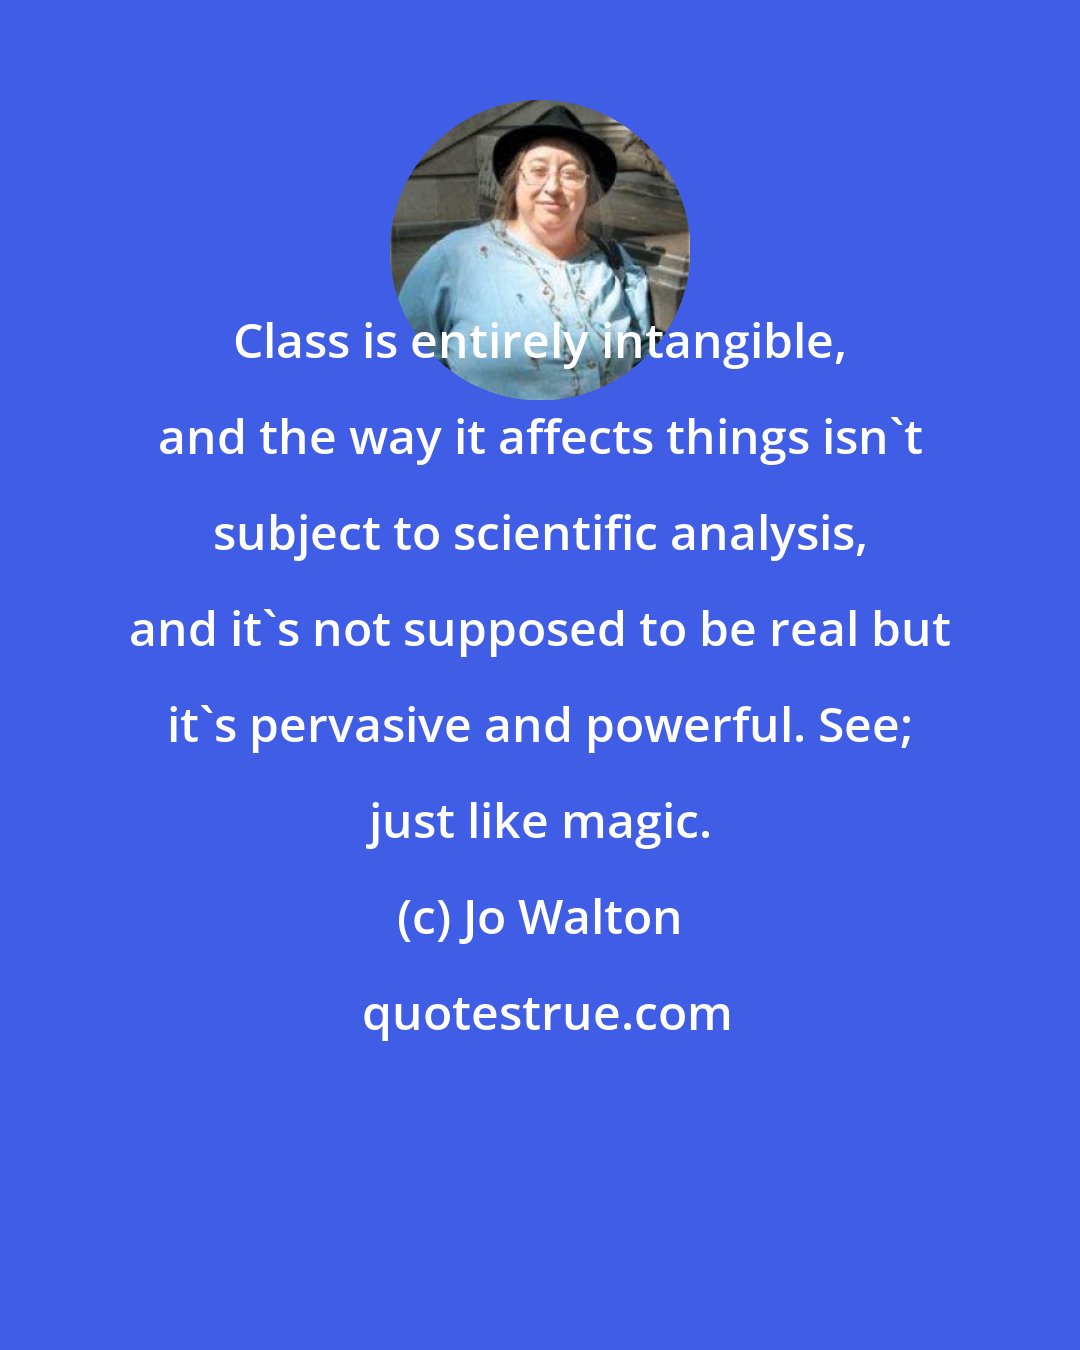 Jo Walton: Class is entirely intangible, and the way it affects things isn't subject to scientific analysis, and it's not supposed to be real but it's pervasive and powerful. See; just like magic.